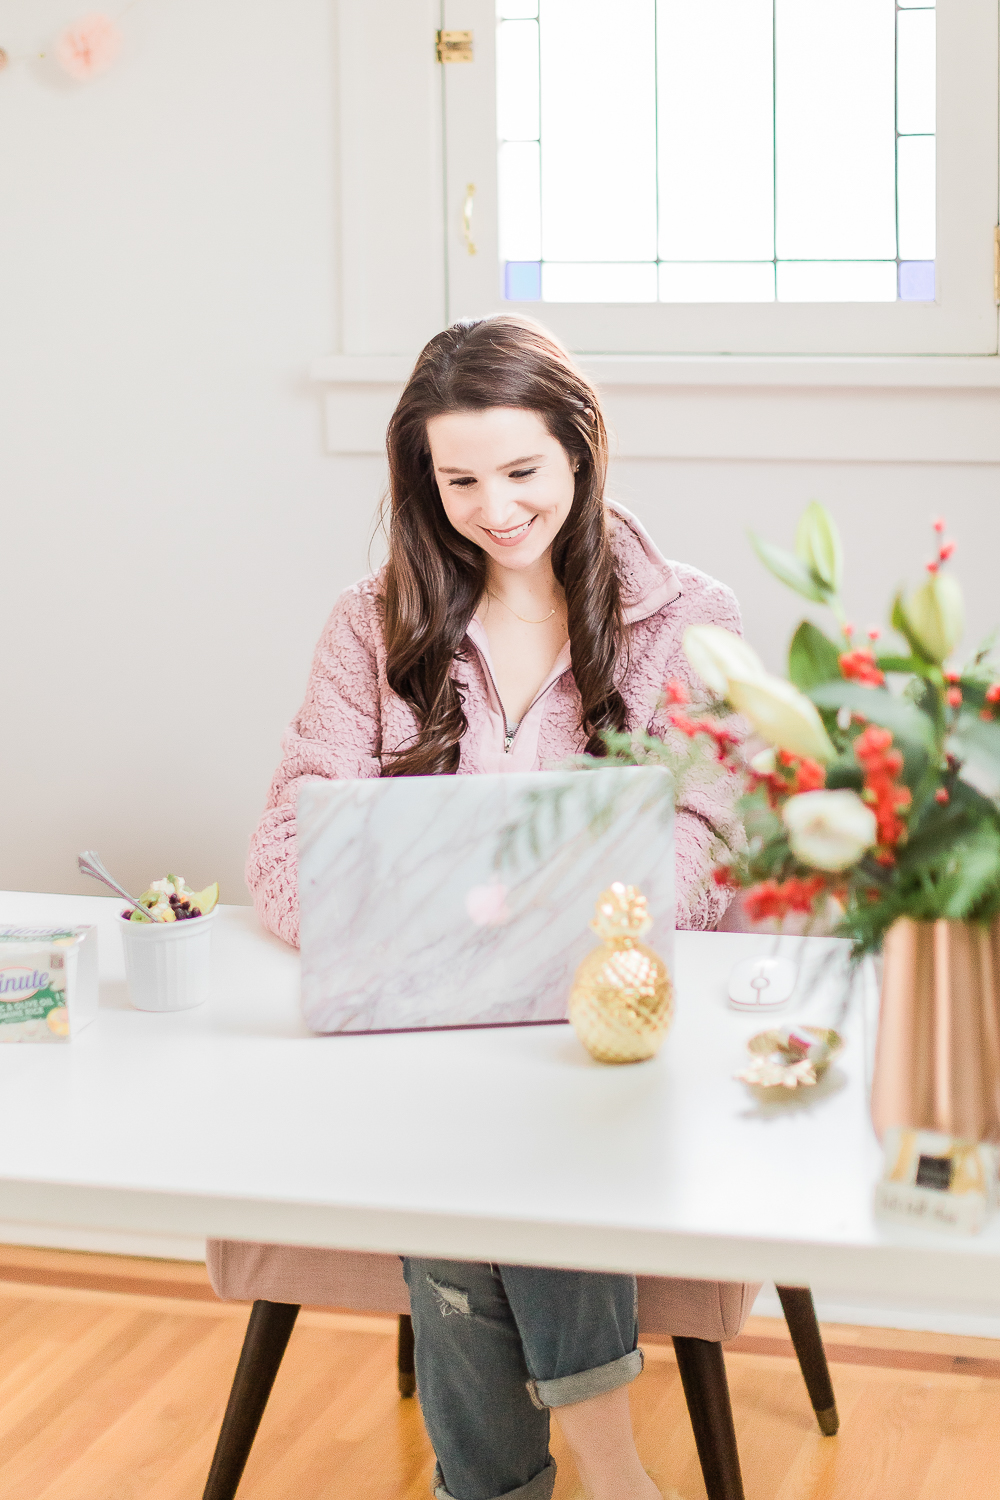 Girl typing on her computer, woman working at desk, white office decor ideas, popular lifestyle blogger Stephanie Ziajka, popular southern lifestyle blog Diary of a Debutante